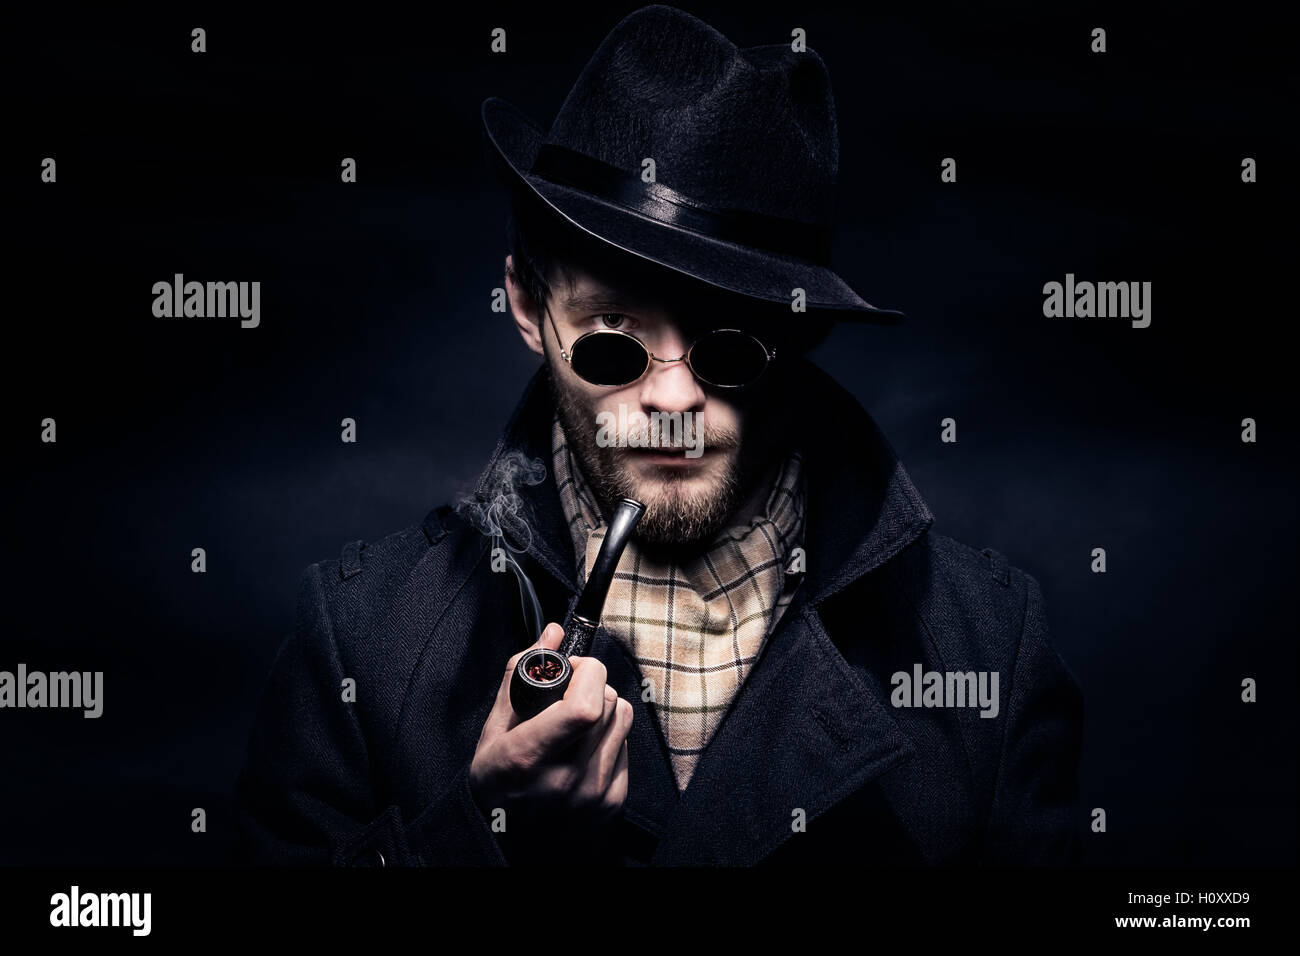 Portrait of a man, Sherlock Holmes like character on the black background. Holding a smoking pipe in the hand and wearing sunglasses, hat, scarf, coat Stock Photo